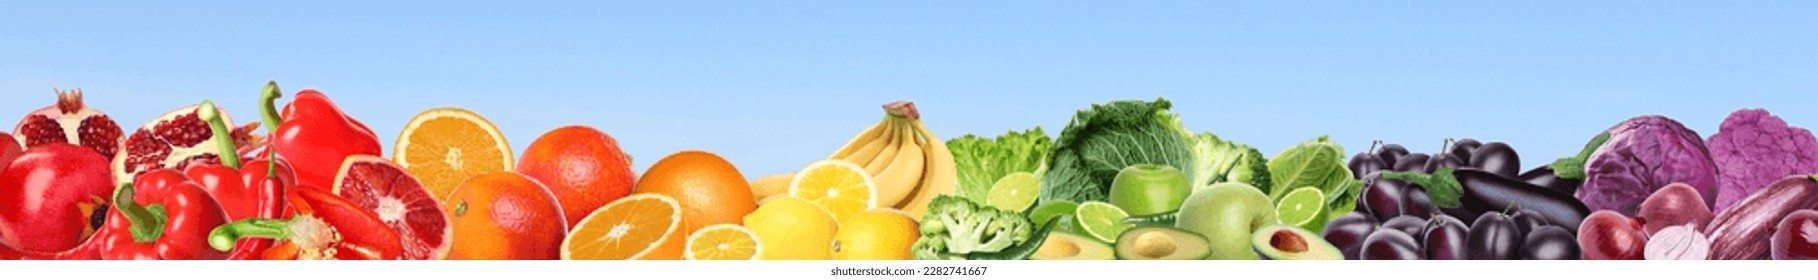 Many different fresh fruits and vegetables on light blue background. Banner design - Shutterstock ID 2282741667